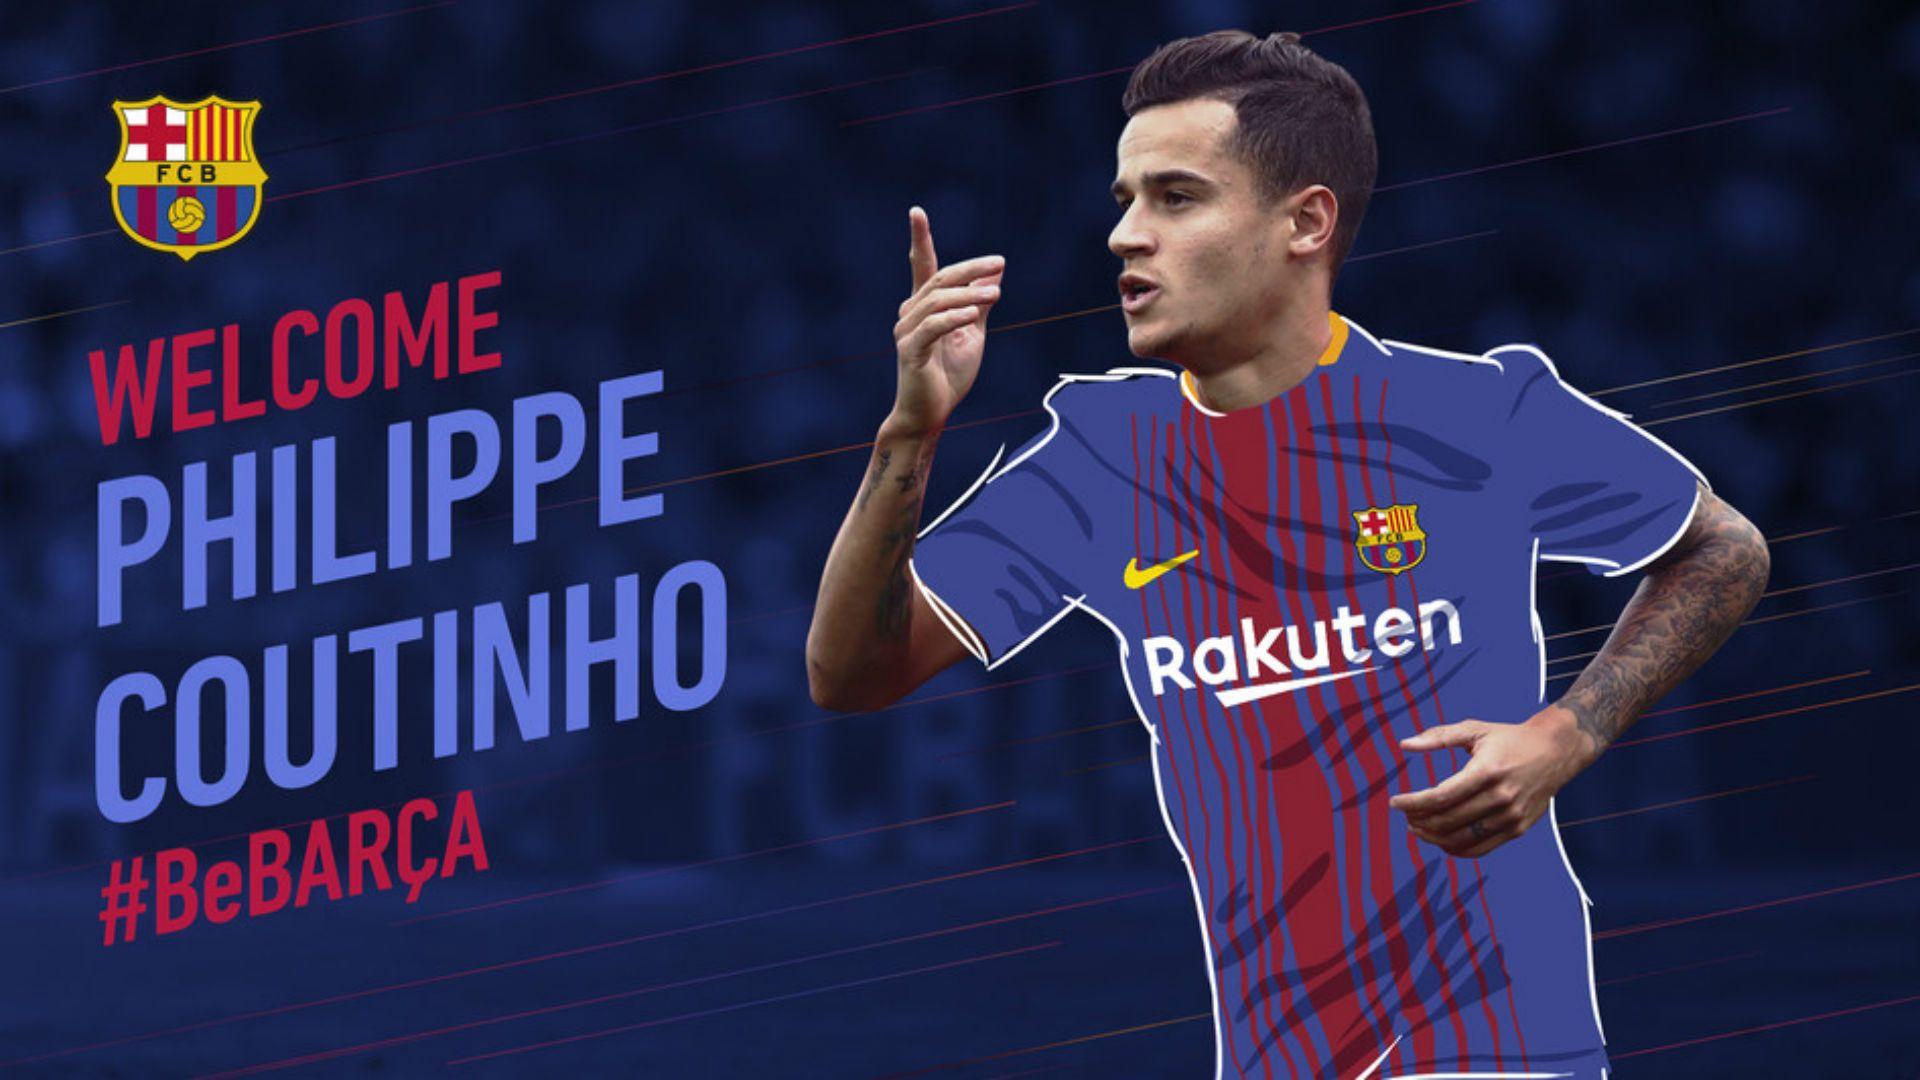 Barcelona Agree Big Money Deal To Sign Coutinho. EPL News